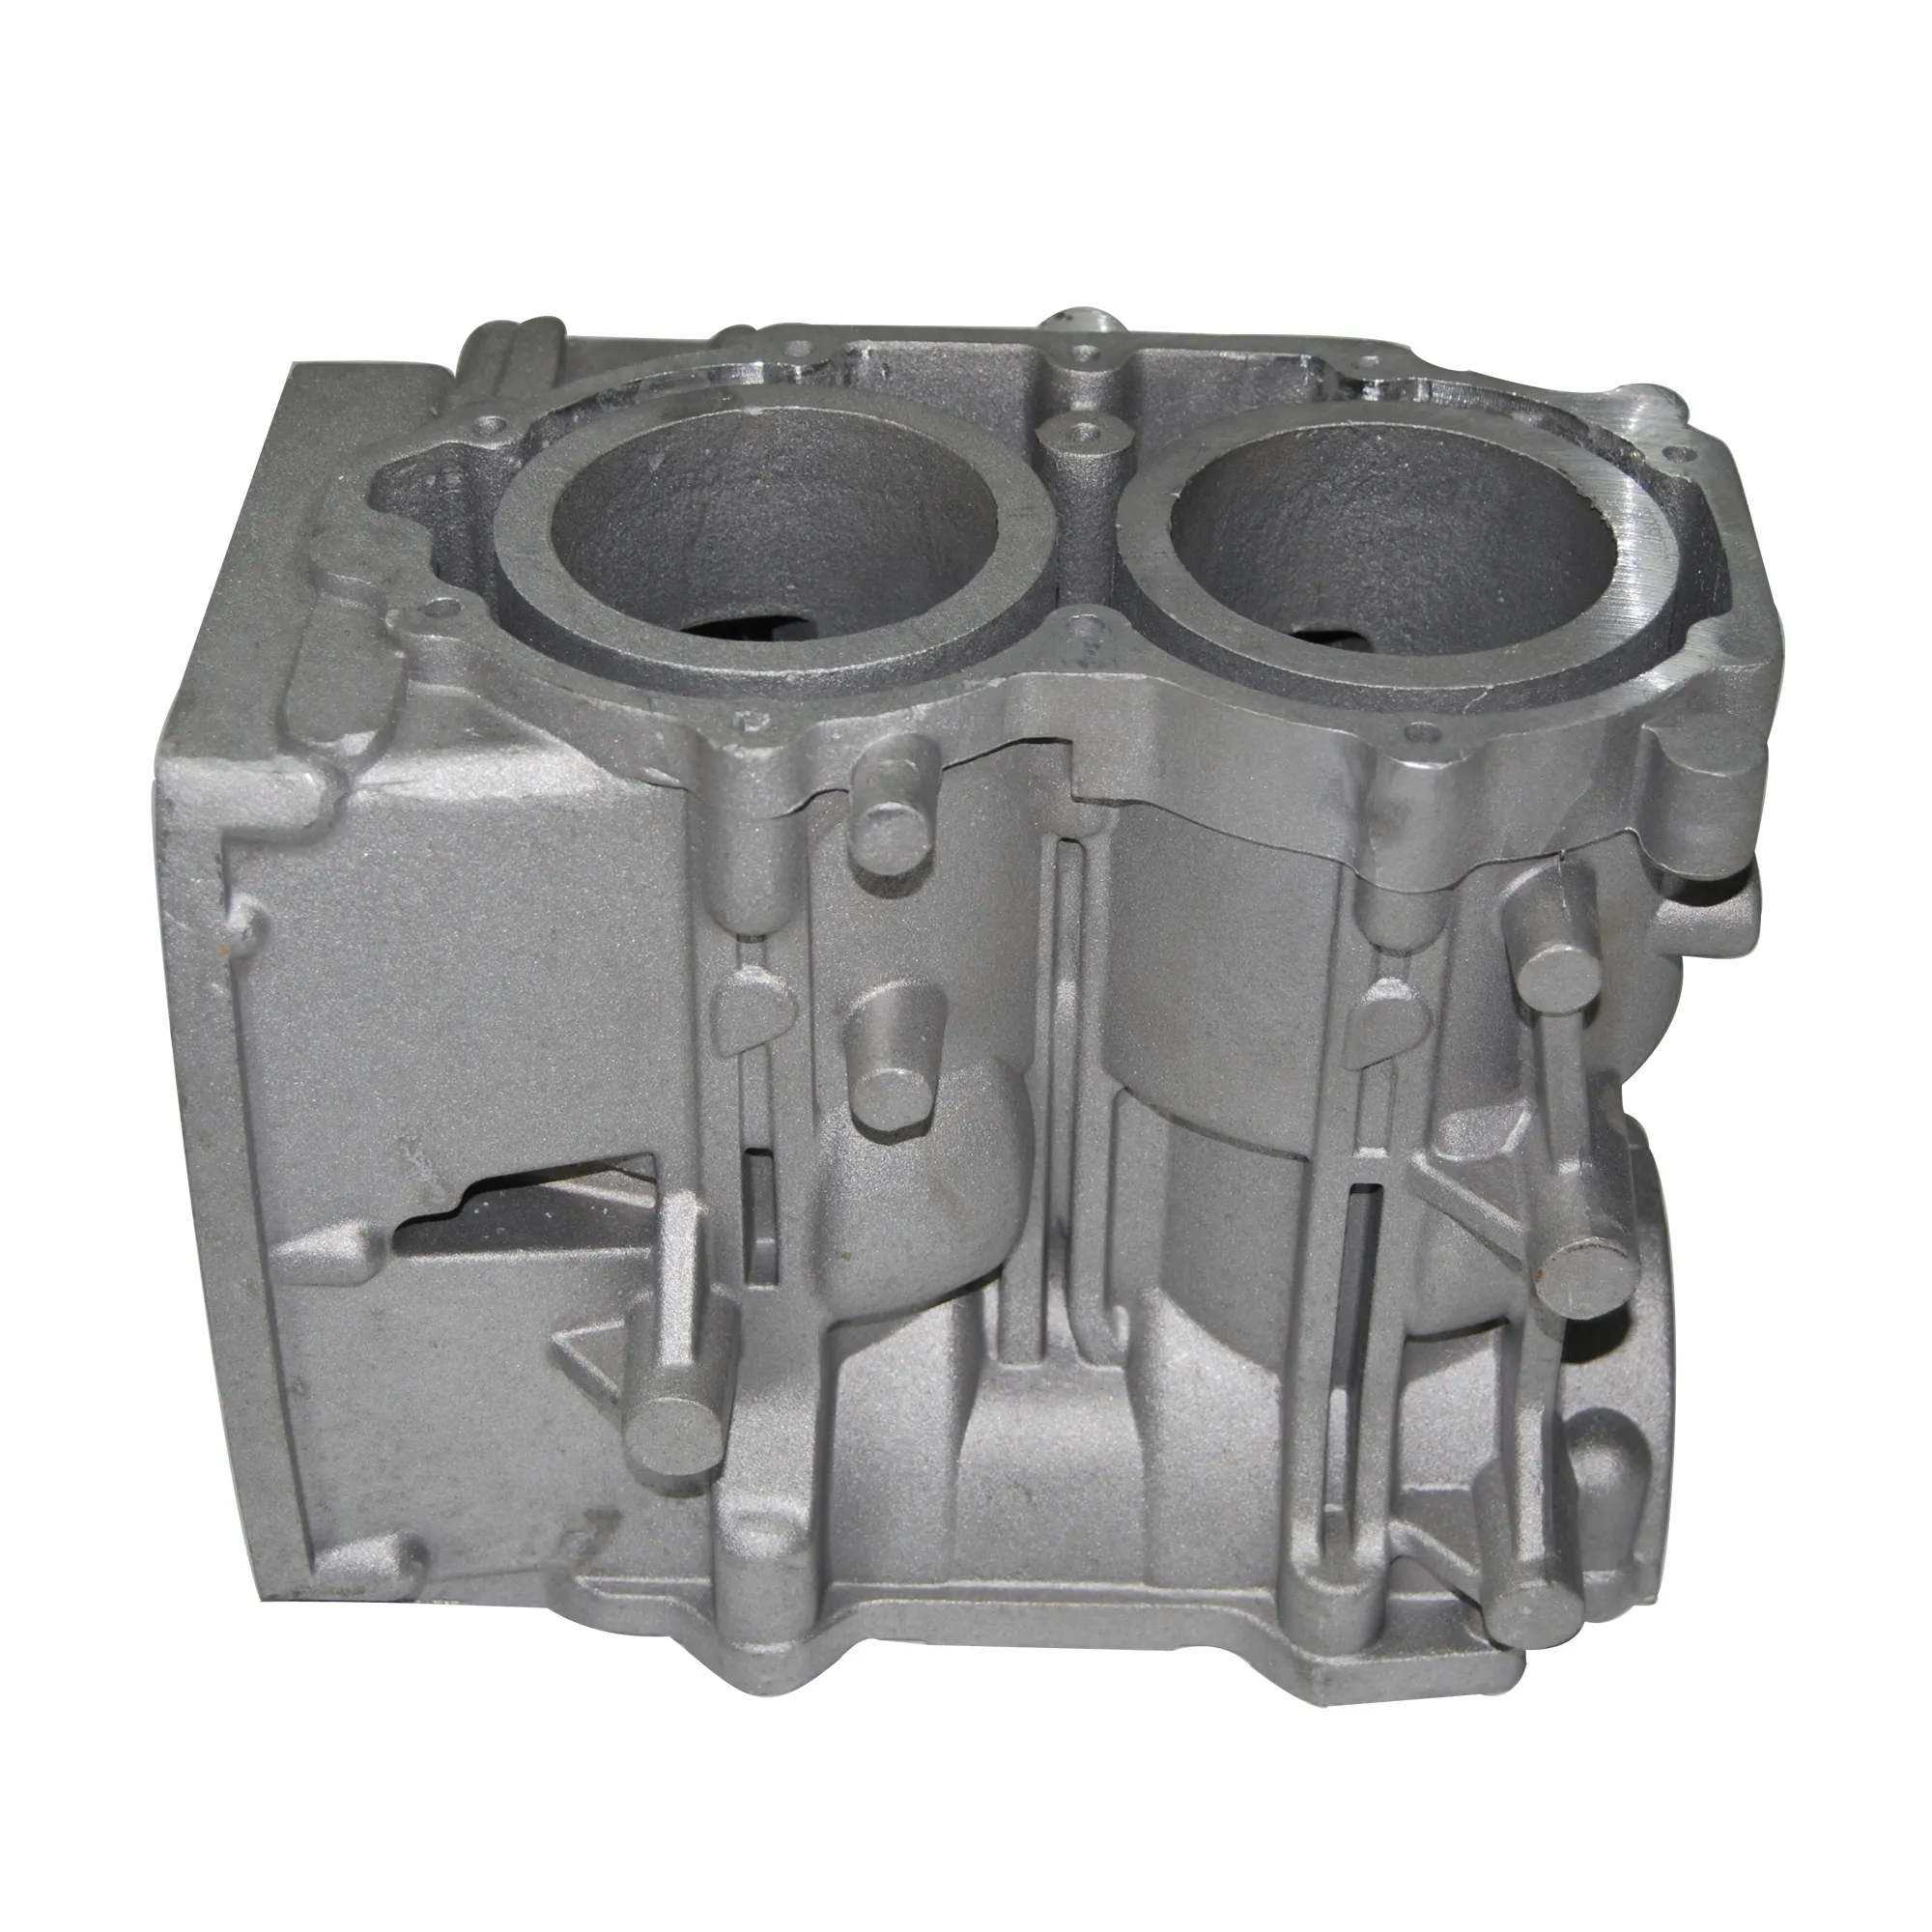 Automation 5 Axis Aluminium Engine Block Casting Forging And Machining